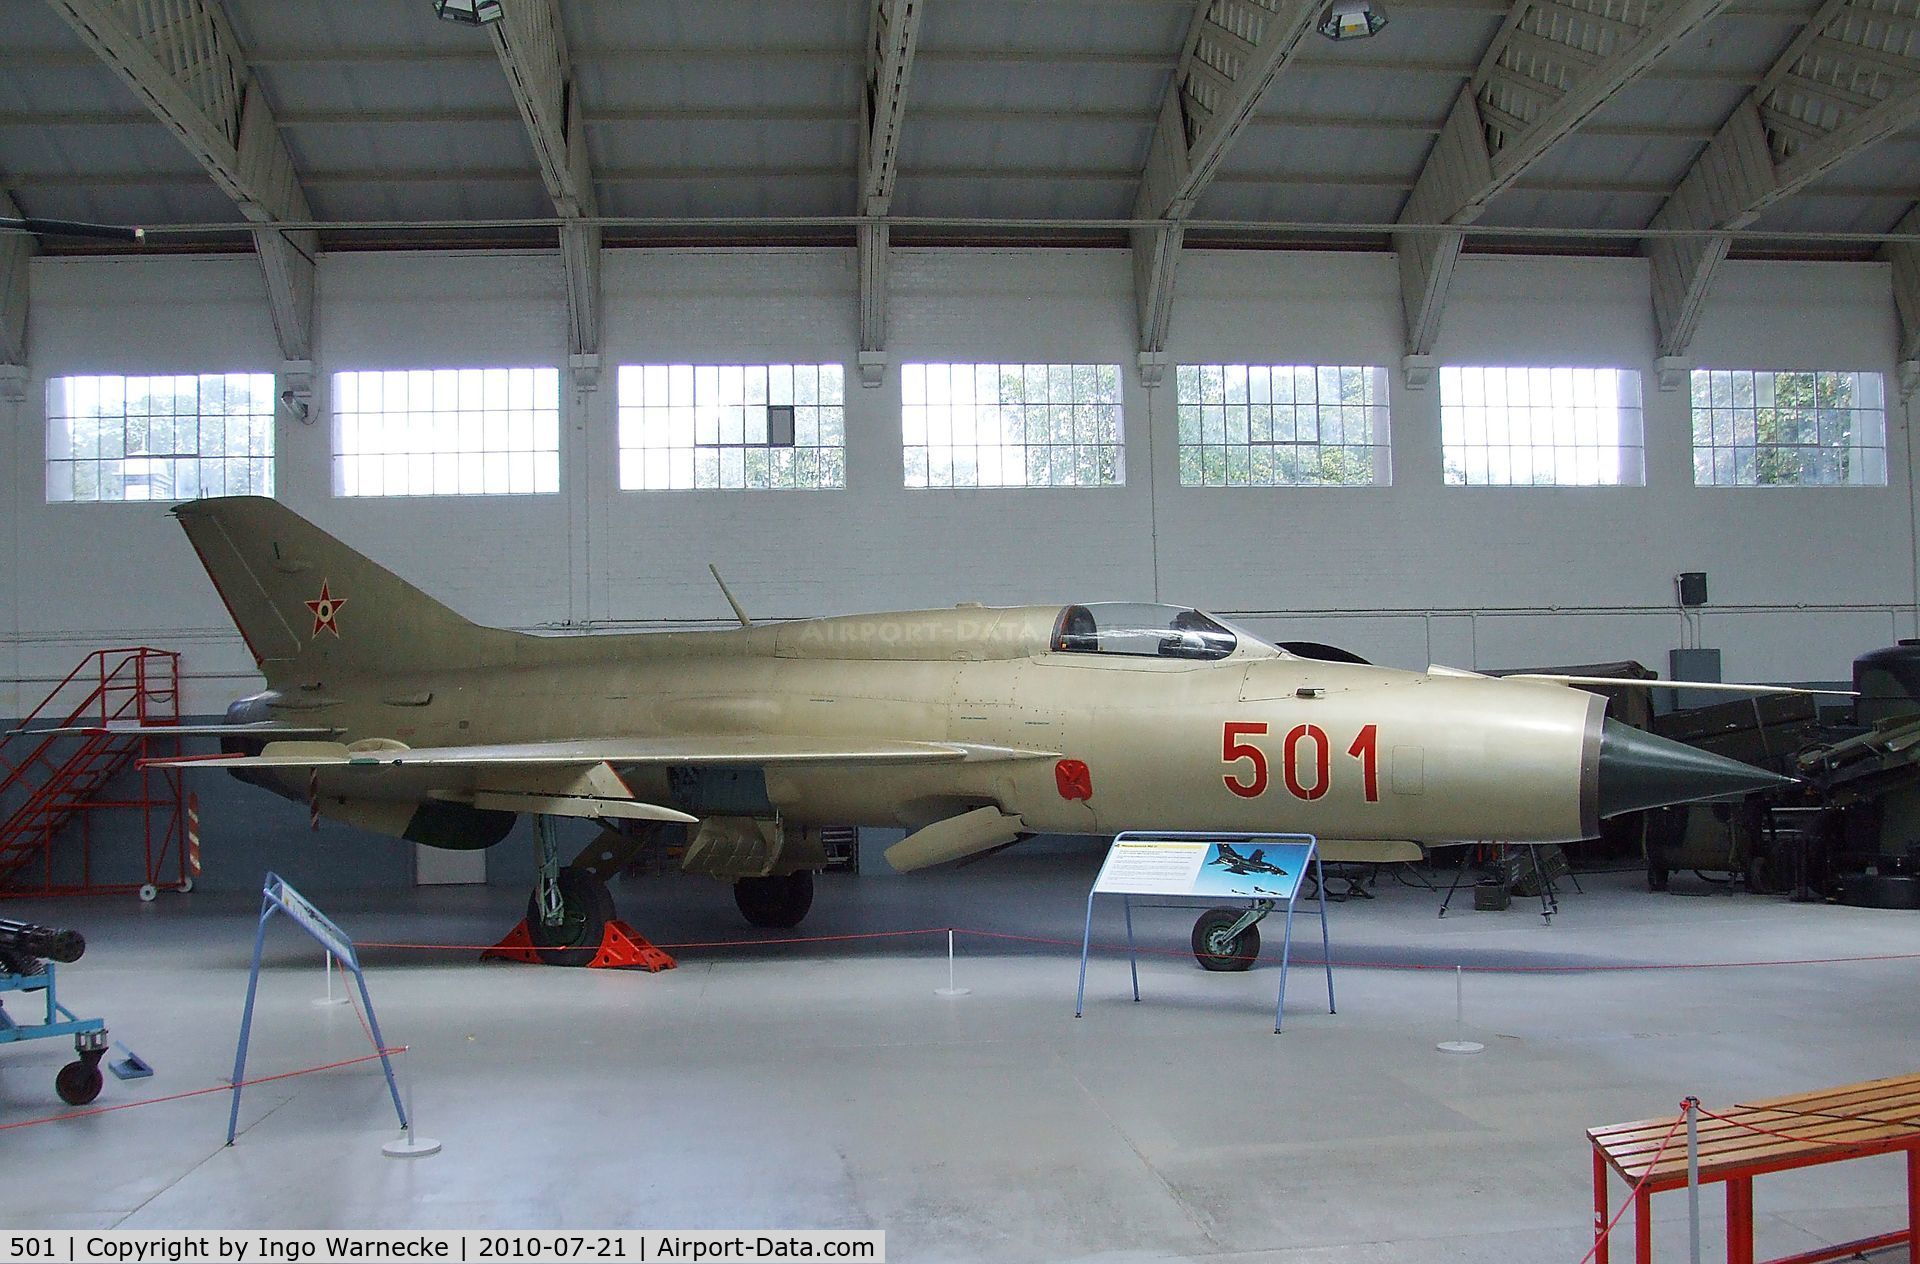 501, 1964 Mikoyan-Gurevich MiG-21PF C/N 760501, Mikoyan i Gurevich MiG-21PF FISHBED-D at the Imperial War Museum, Duxford